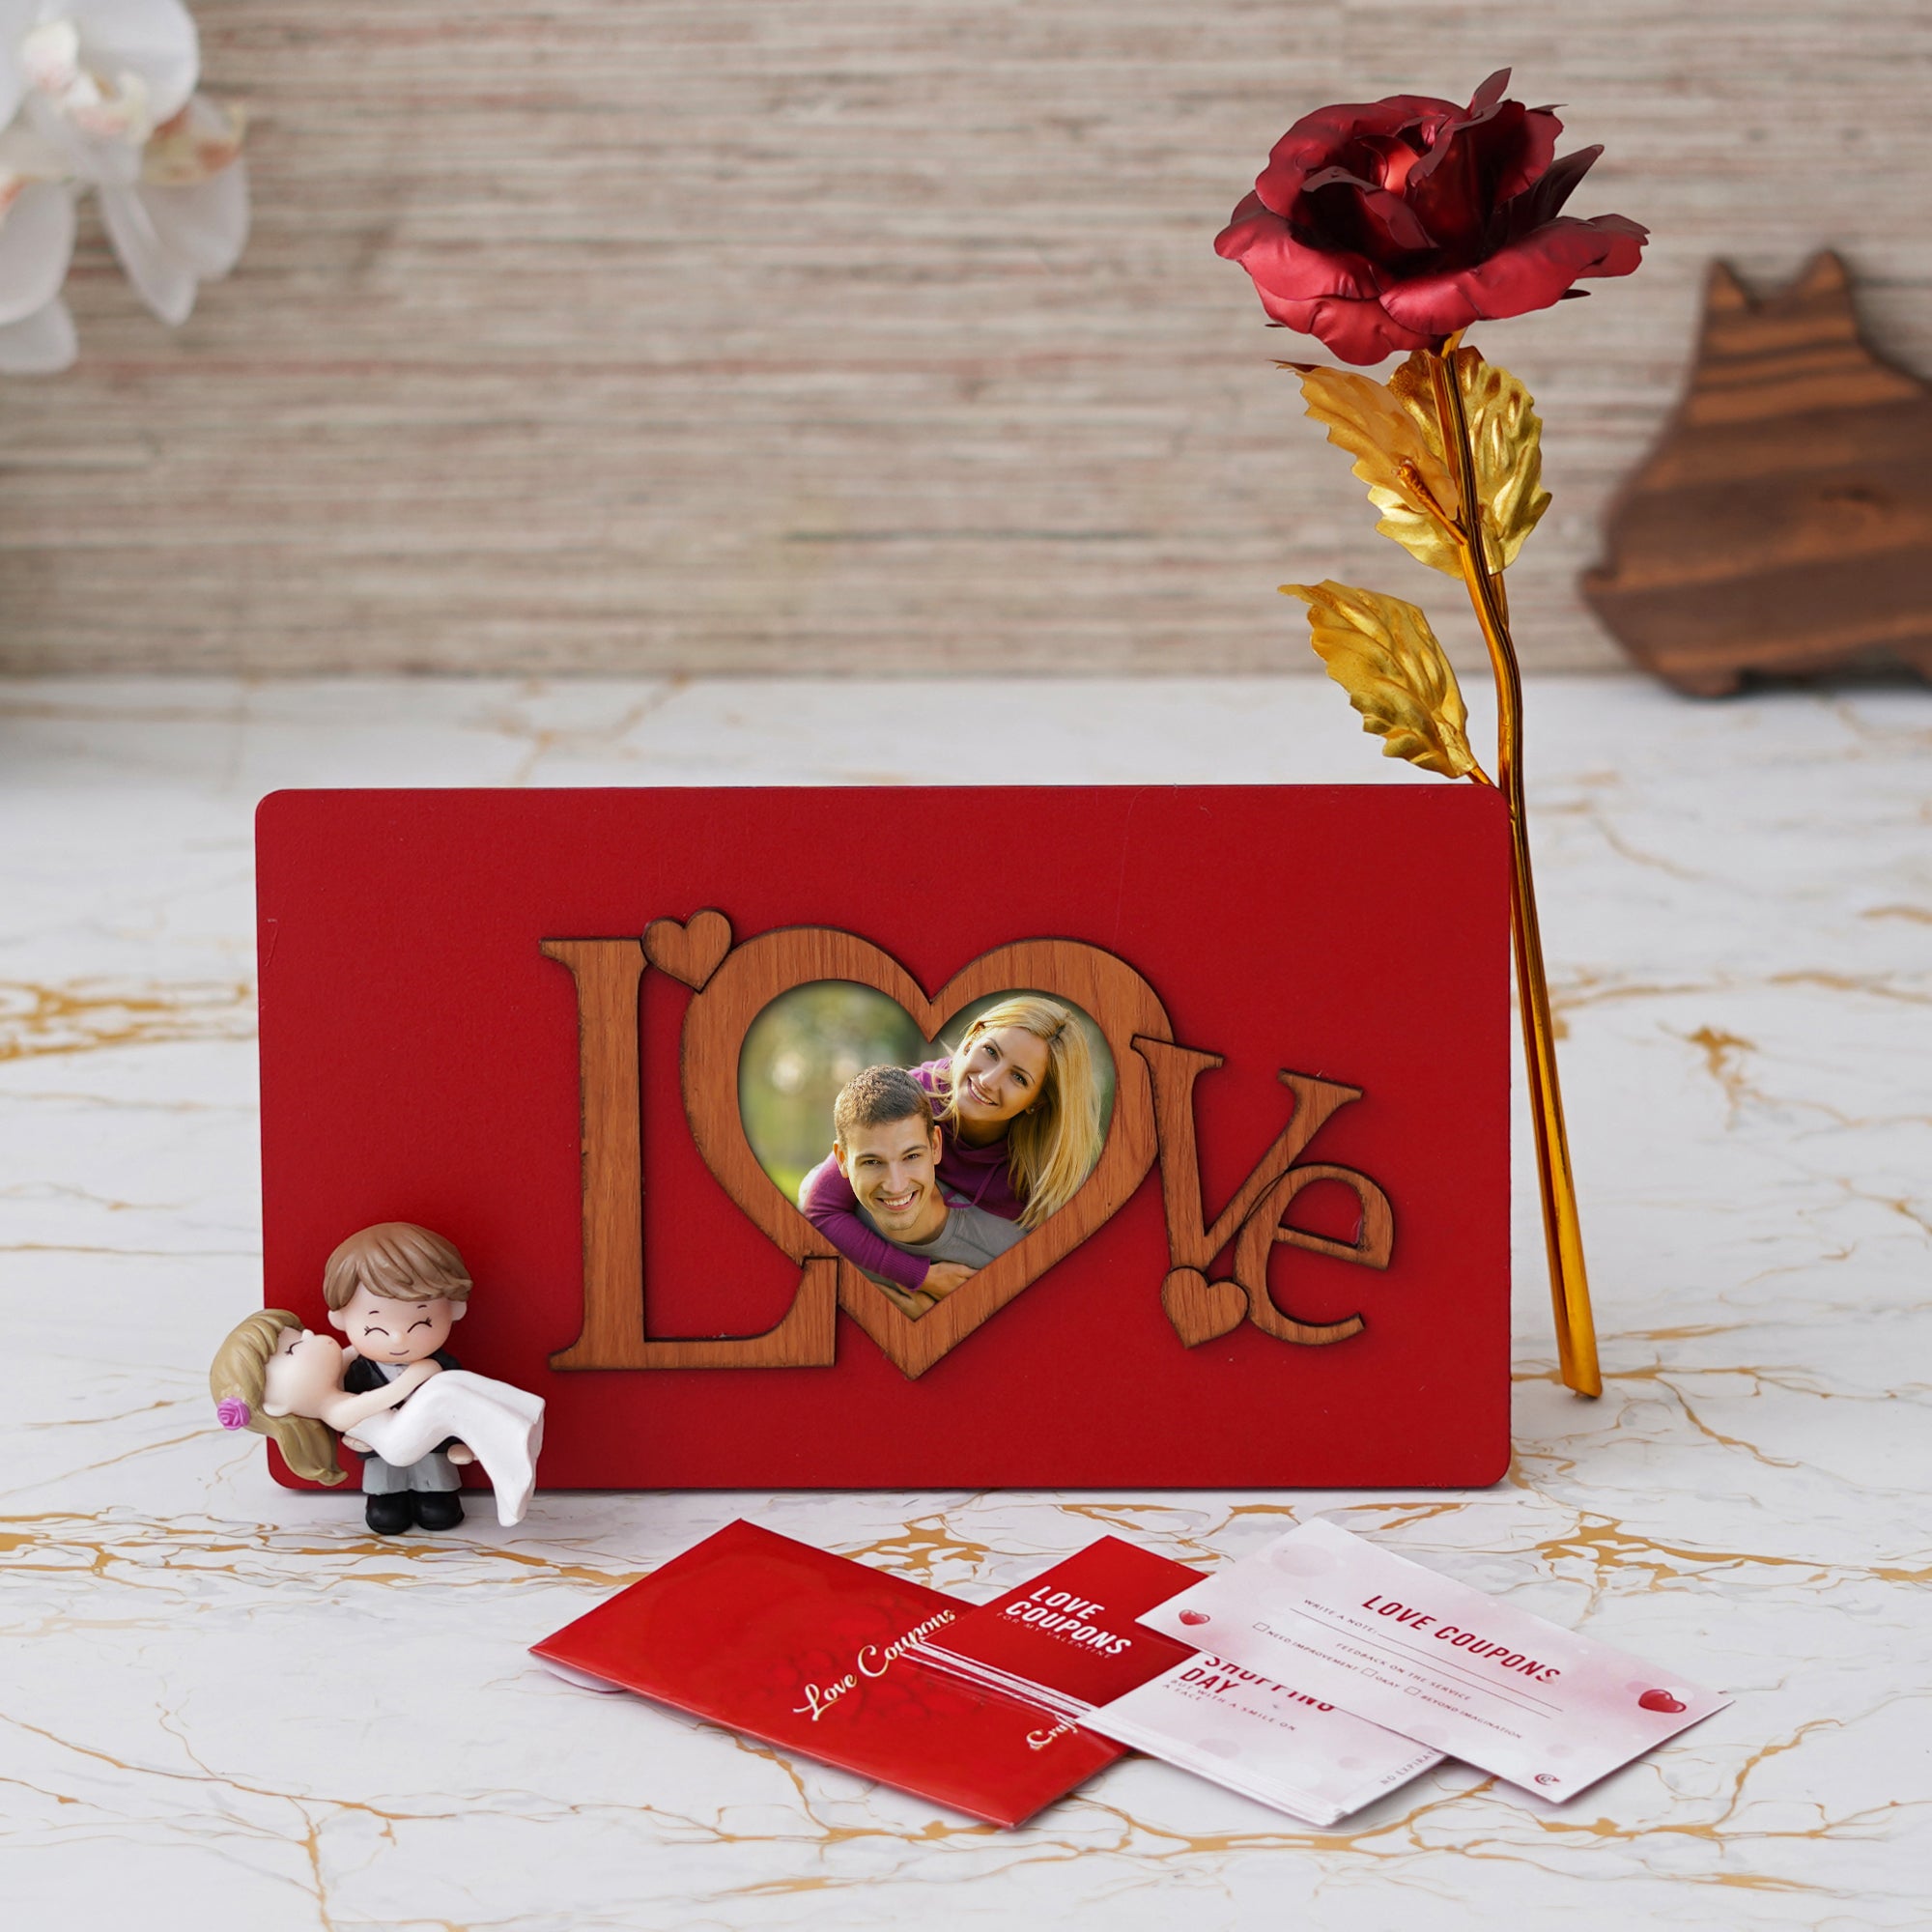 Valentine Combo of Pack of 12 Love Coupons Gift Cards Set, Golden Red Rose Gift Set, "Love" Wooden Photo Frame With Red Stand, Bride Kissing Groom Romantic Polyresin Decorative Showpiece